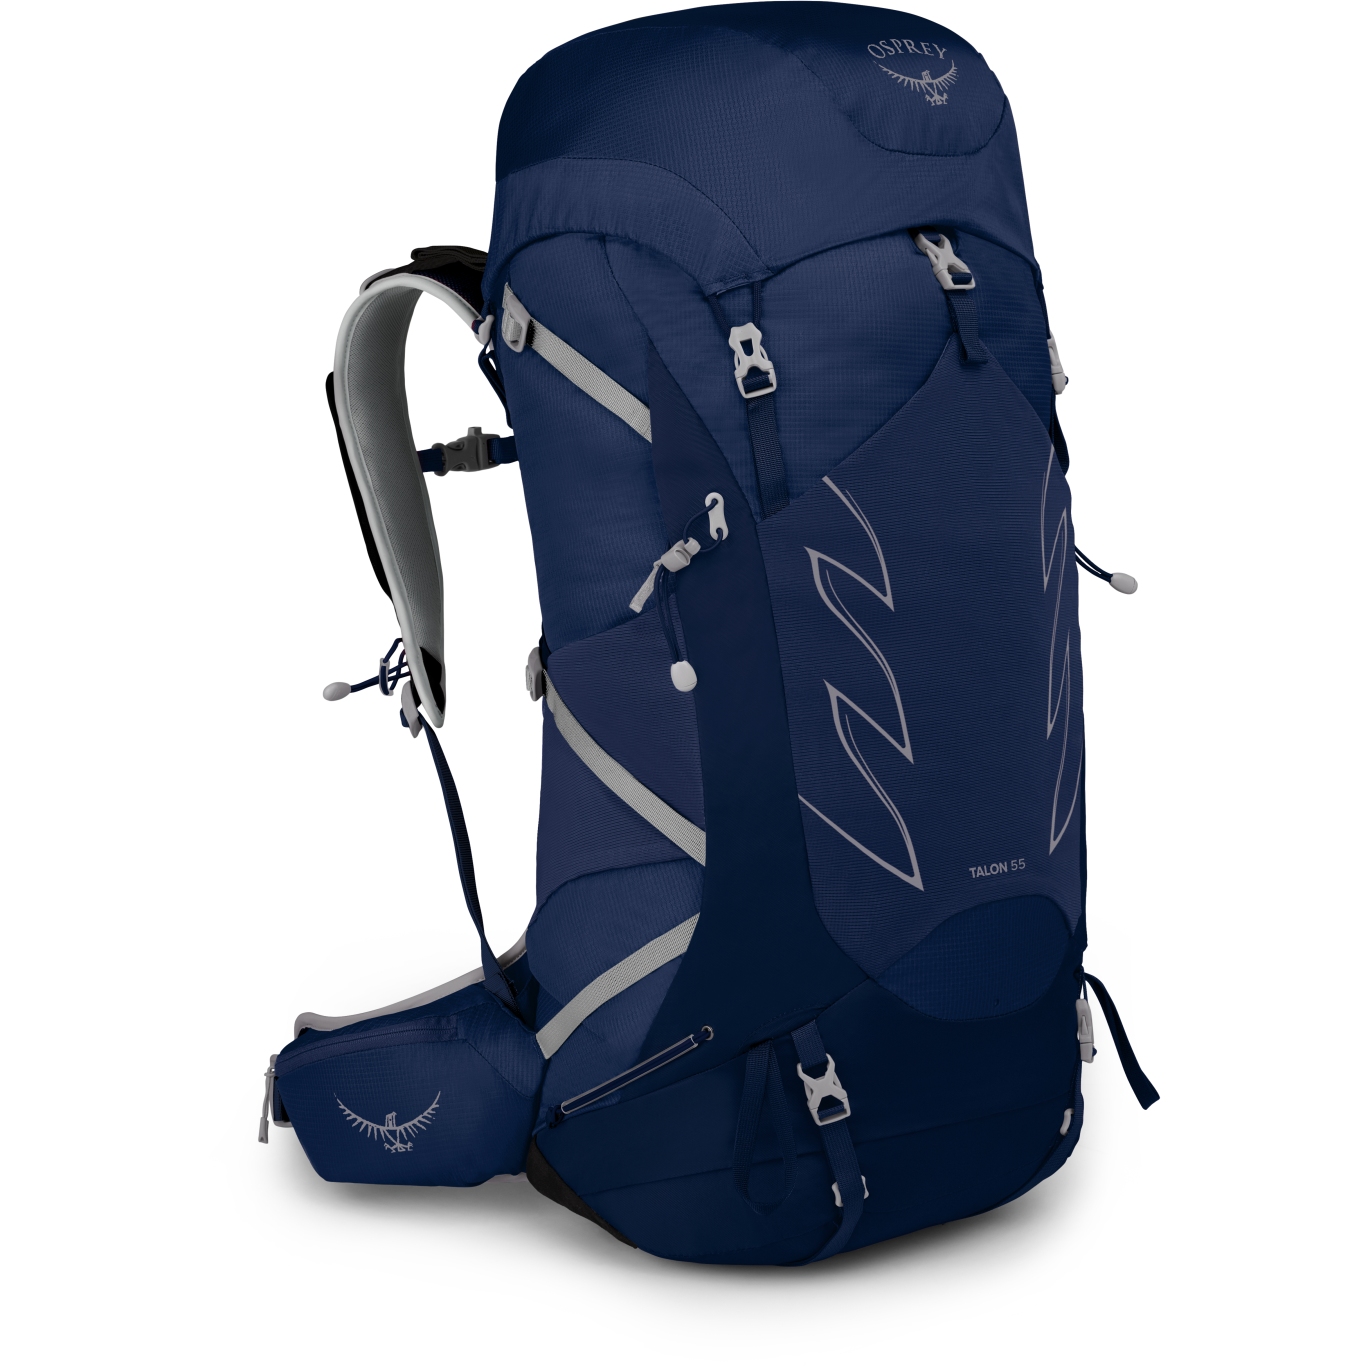 Picture of Osprey Talon 55 Backpack - Ceramic Blue - S/M